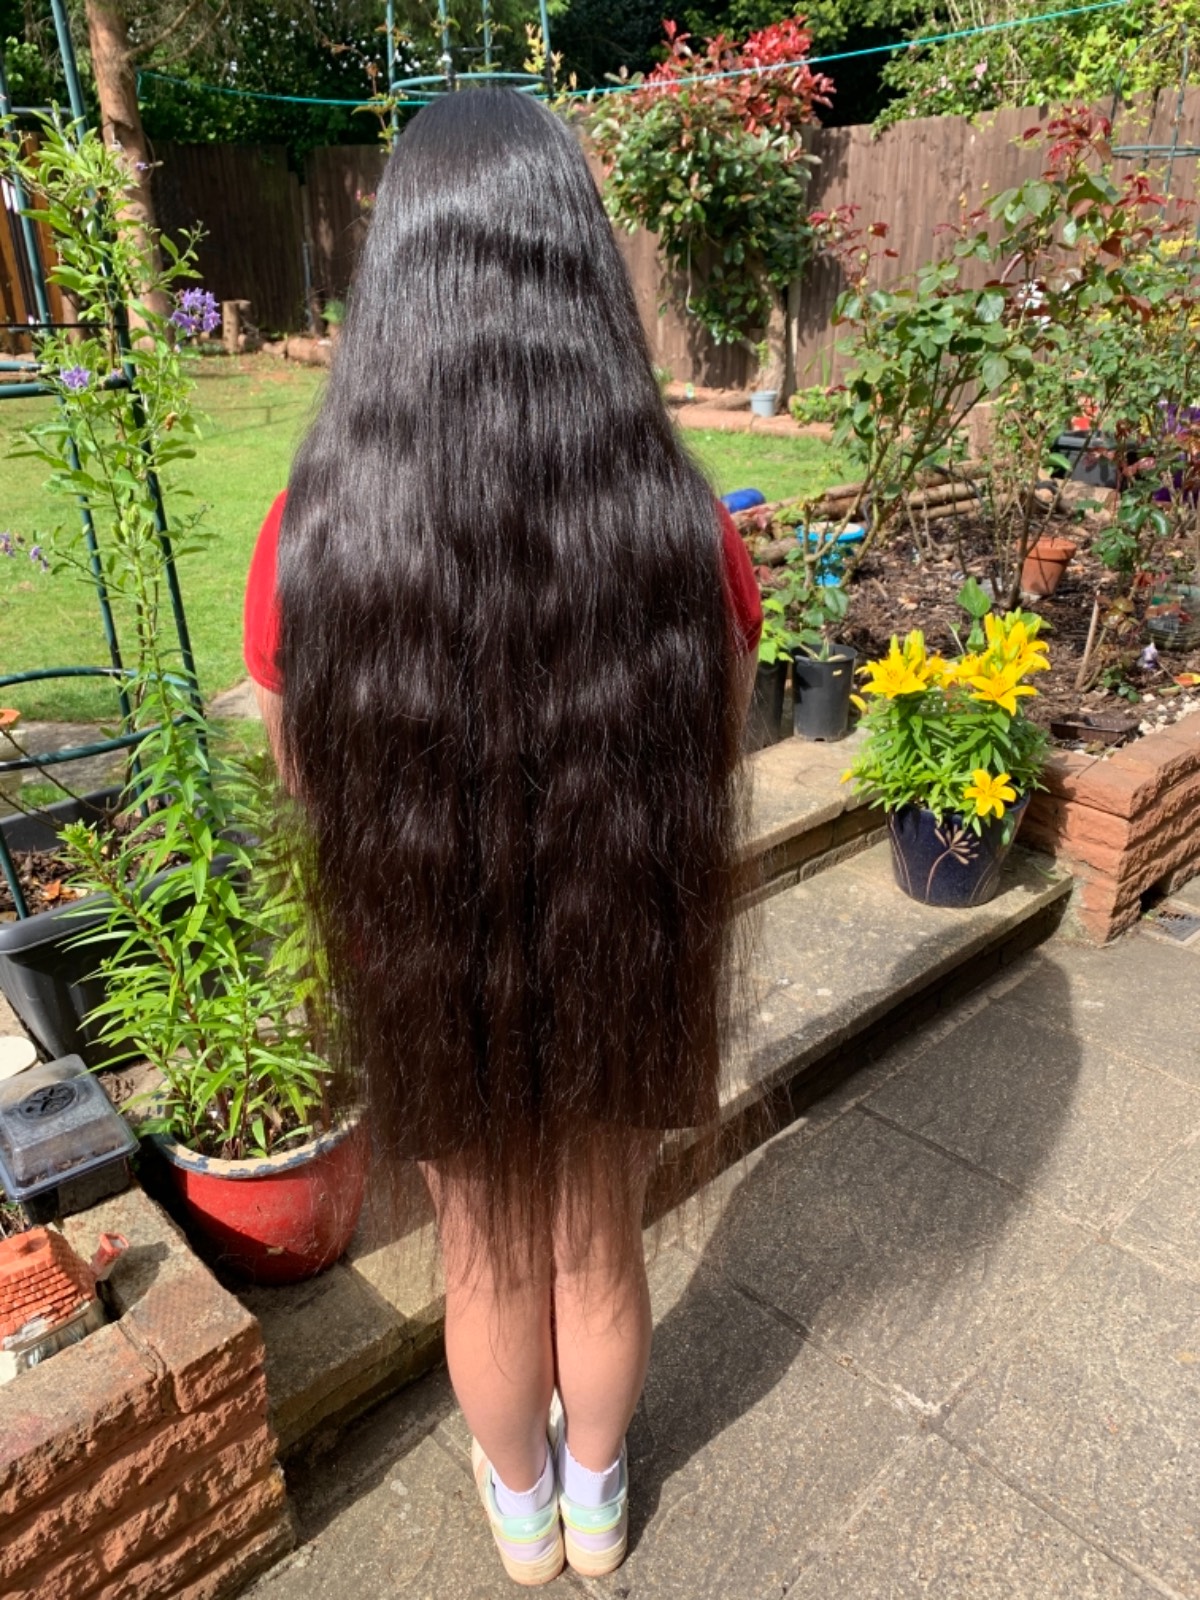 Ameesha’s First Hair Donation